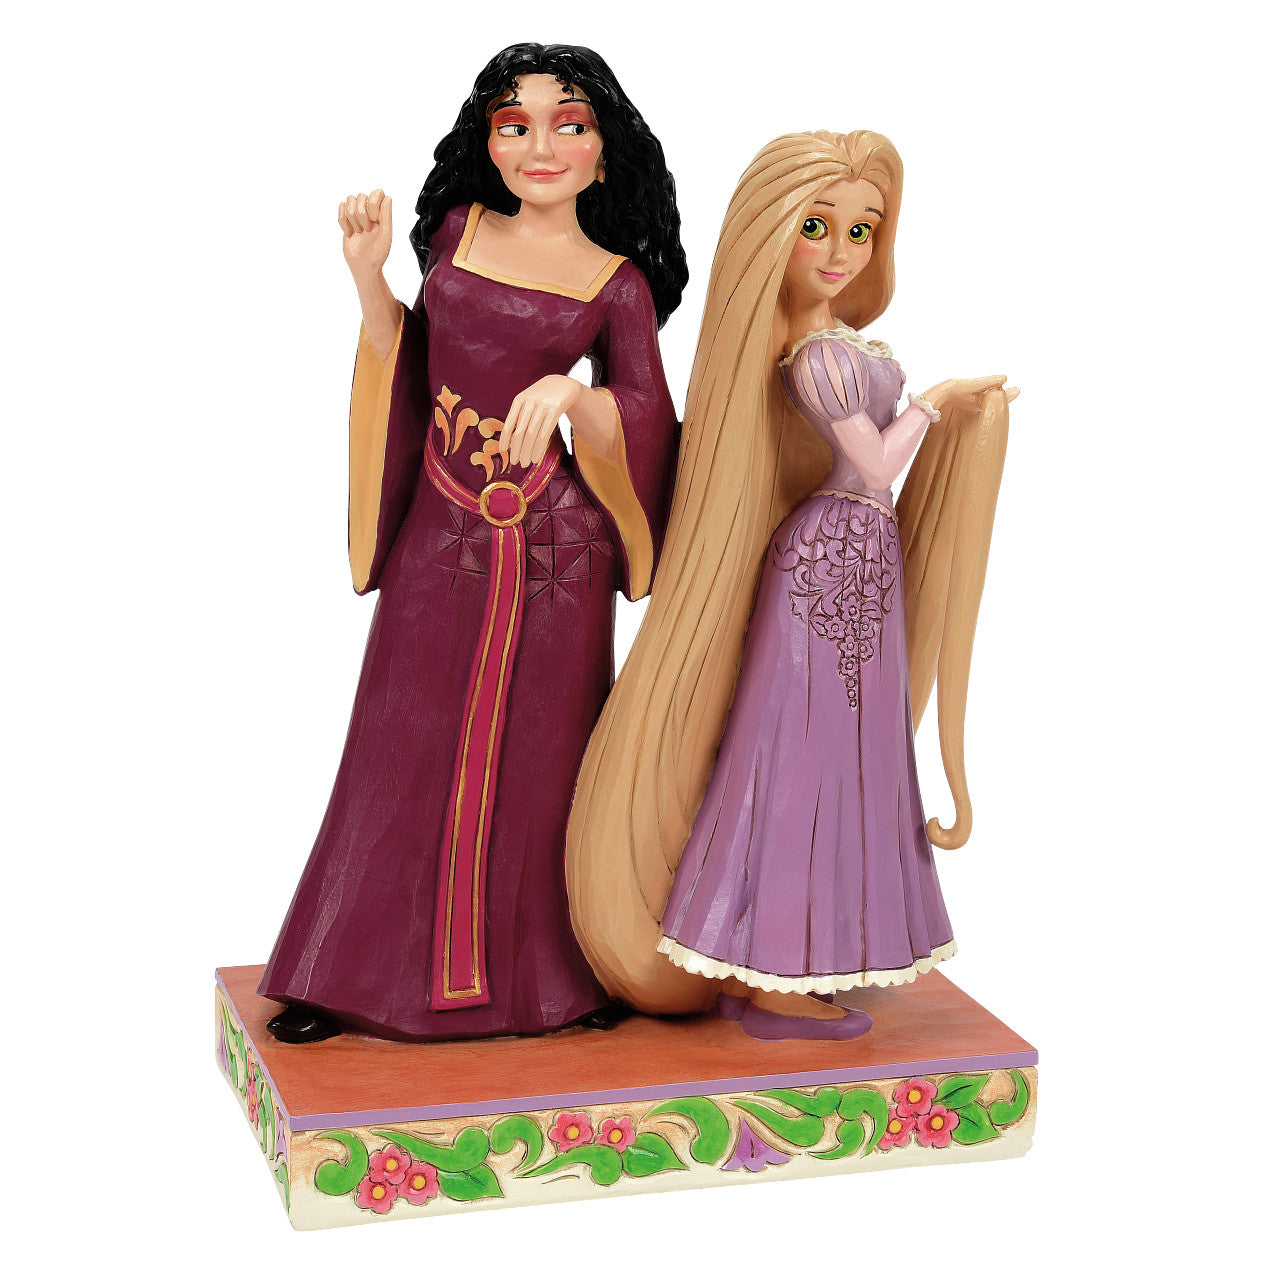 Loyalty & love rapunzel & pascal Figurines Disney Collection -4037514